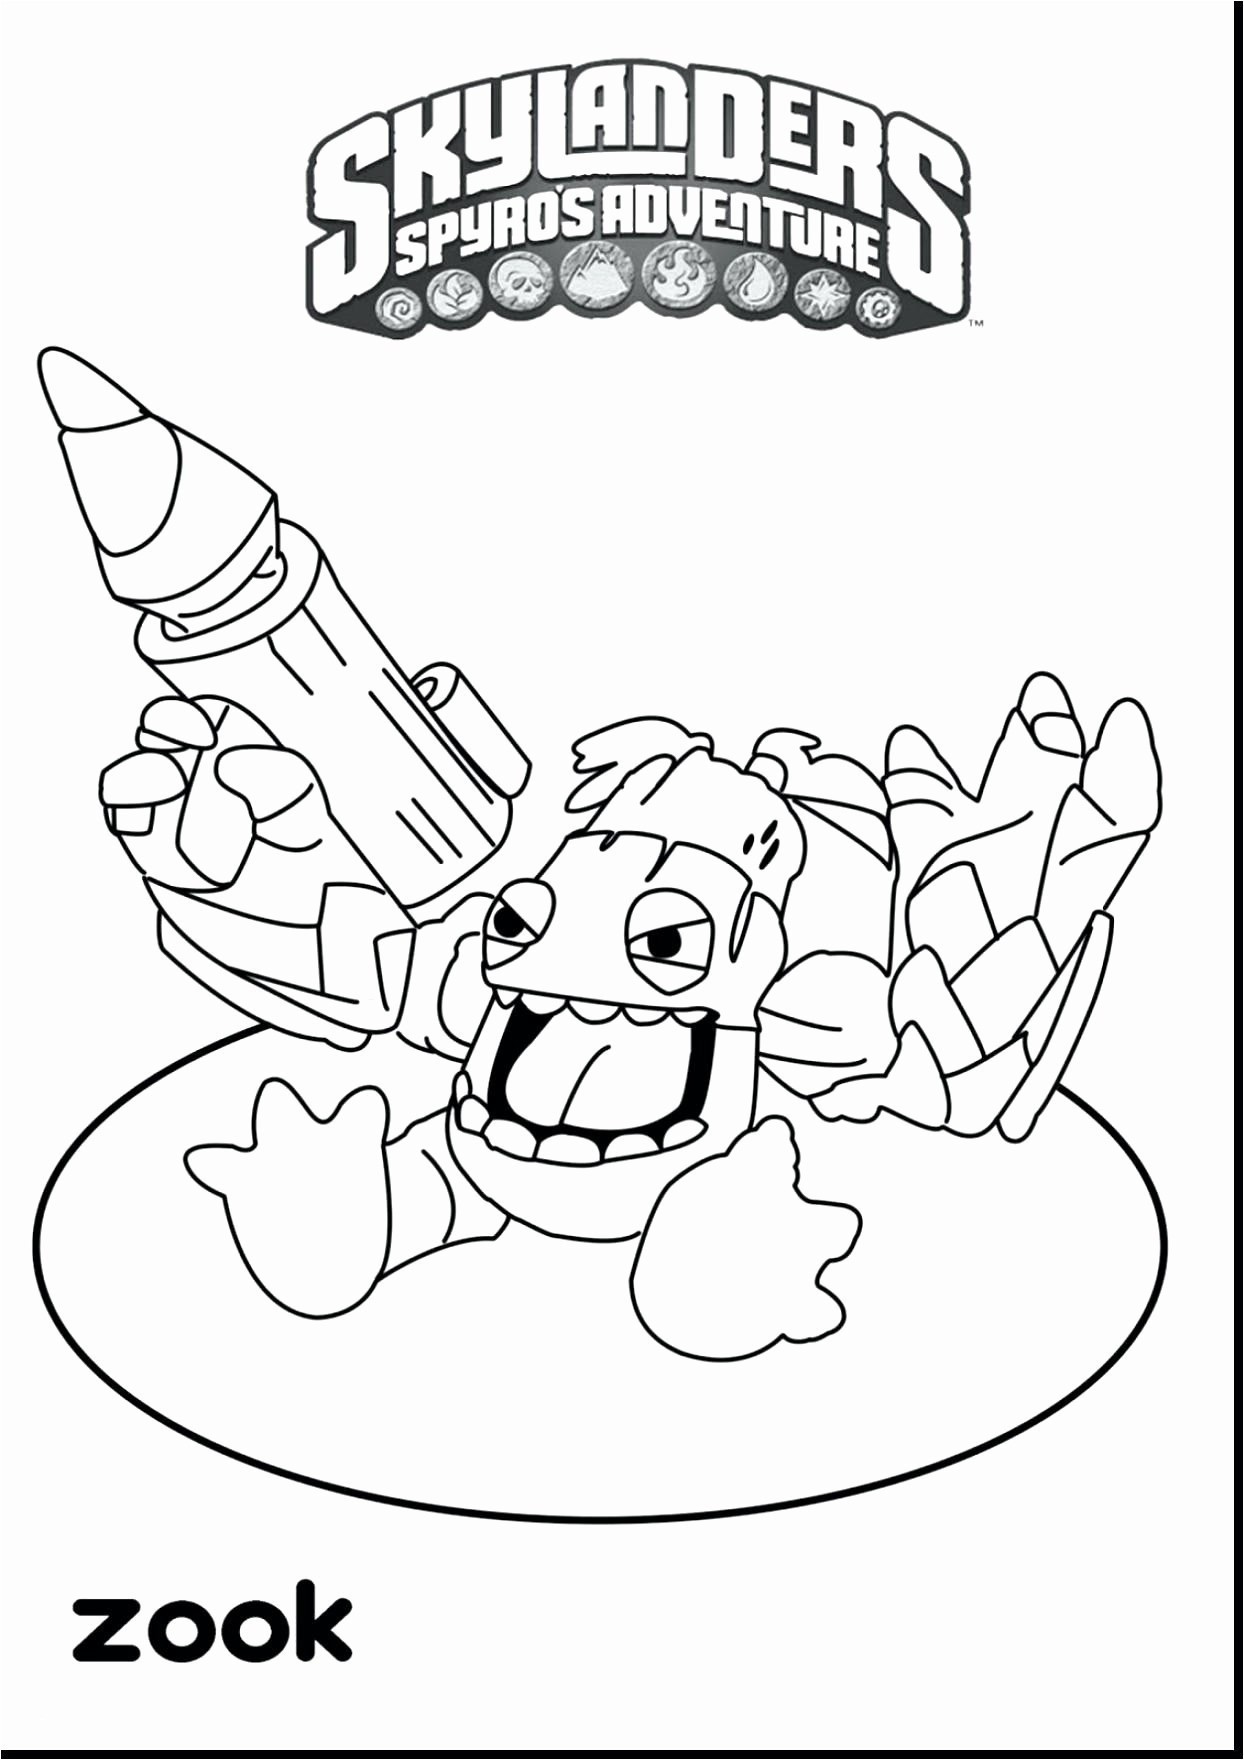 Cool Coloring Page Inspirational Witch Coloring Pages New Crayola Pages 0d Coloring Page